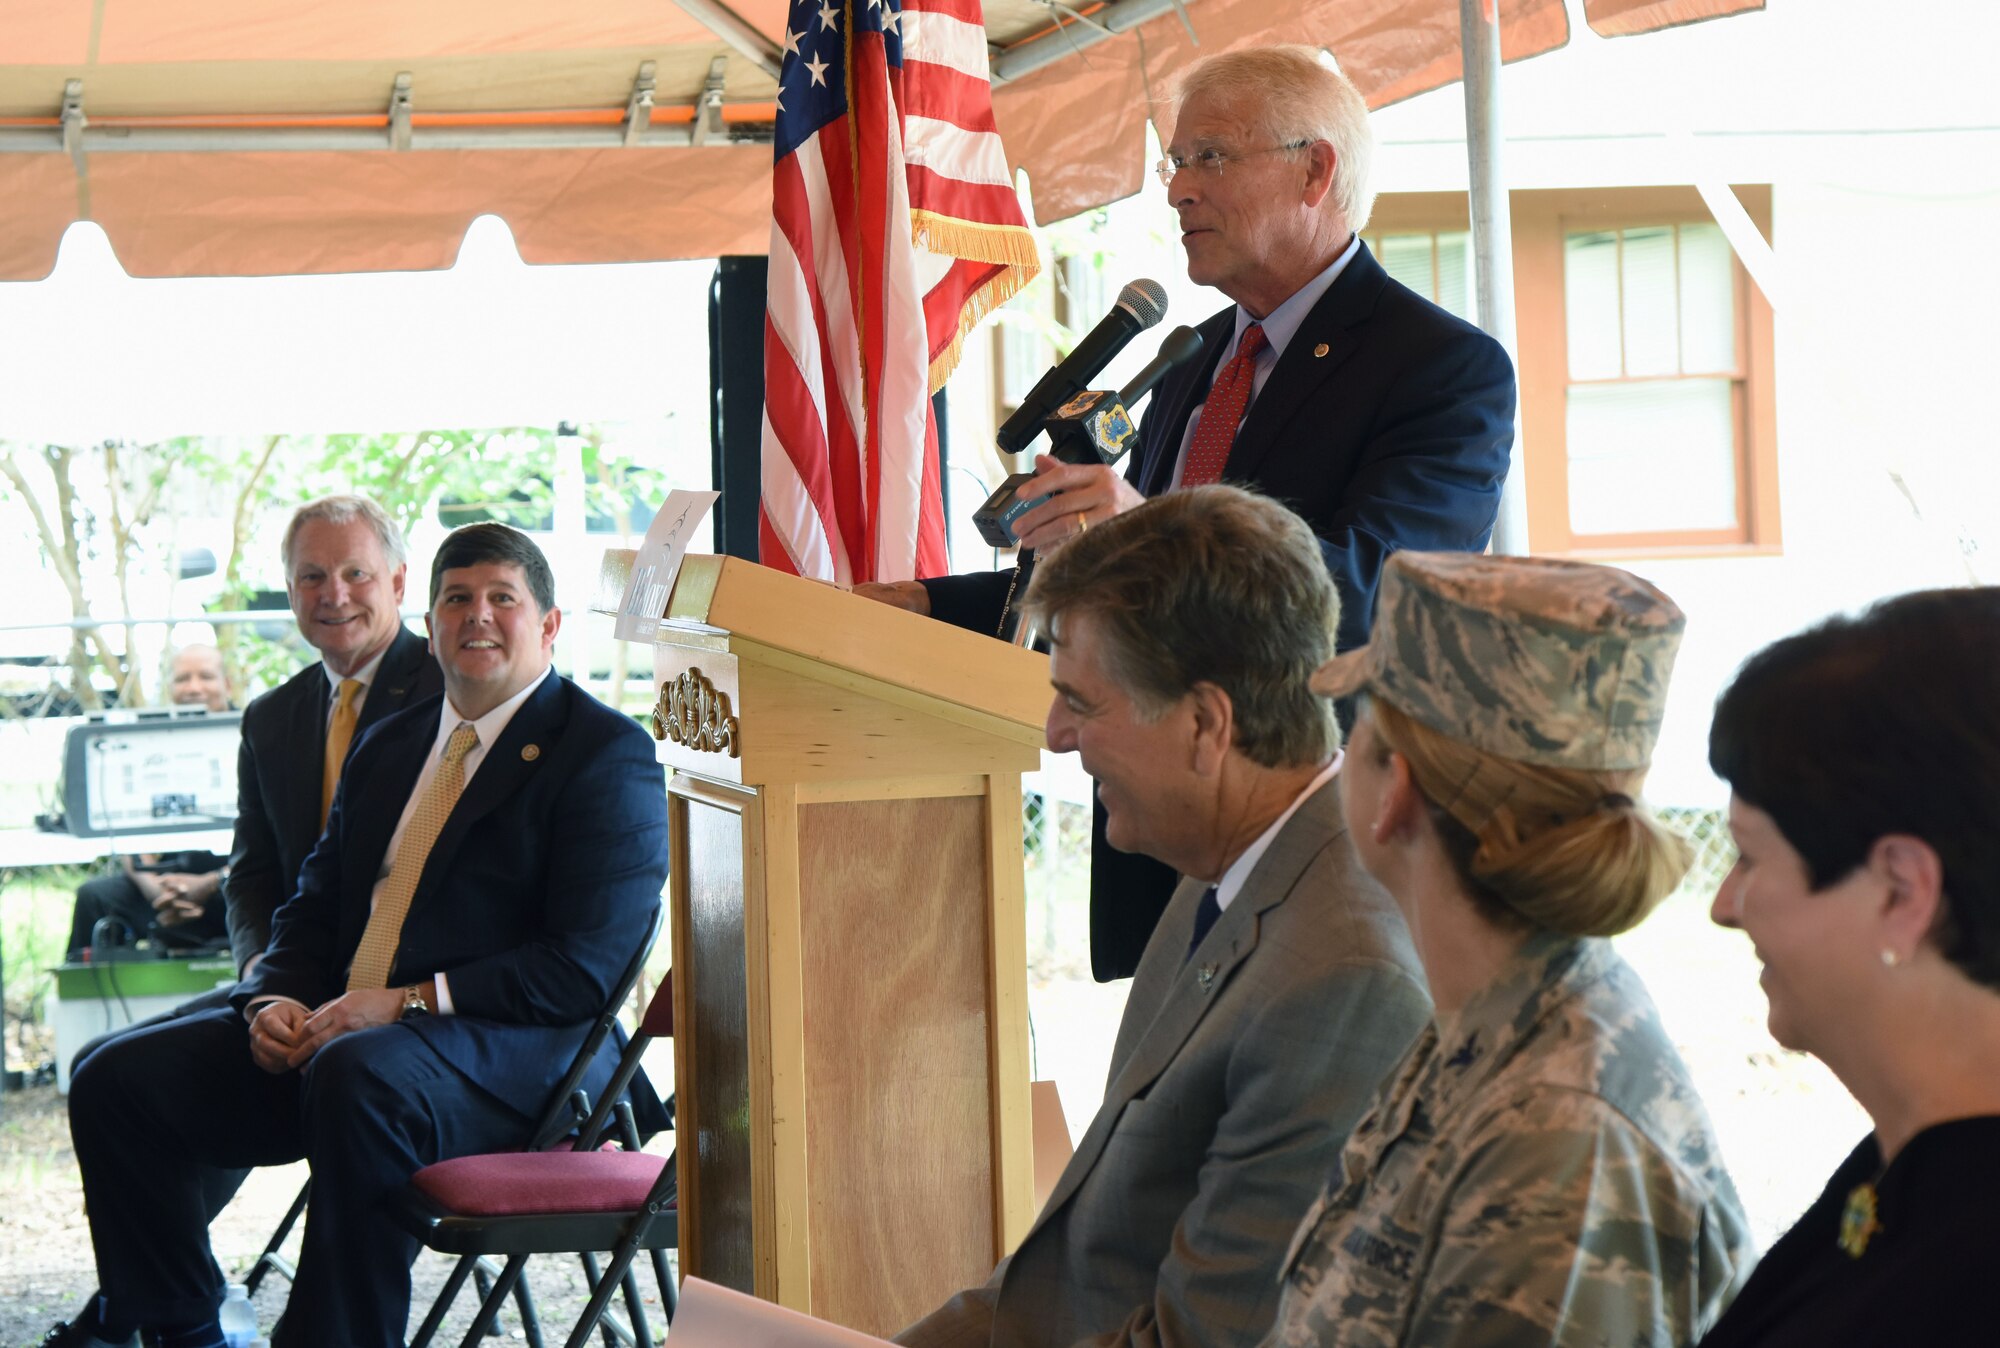 Senator Roger Wicker delivers remarks during the Keesler main gate announcement June 1, 2017, in Biloxi, Miss. Local, state and federal officials joined Keesler Air Force Base leaders to announce an estimated $37 million project to locate a new main entry gate at Division St. and Forrest Ave. The two-year project includes an expanded and enhanced boulevard along Division St. from I-110 to Forrest Ave. (U.S. Air Force photo by Kemberly Groue)